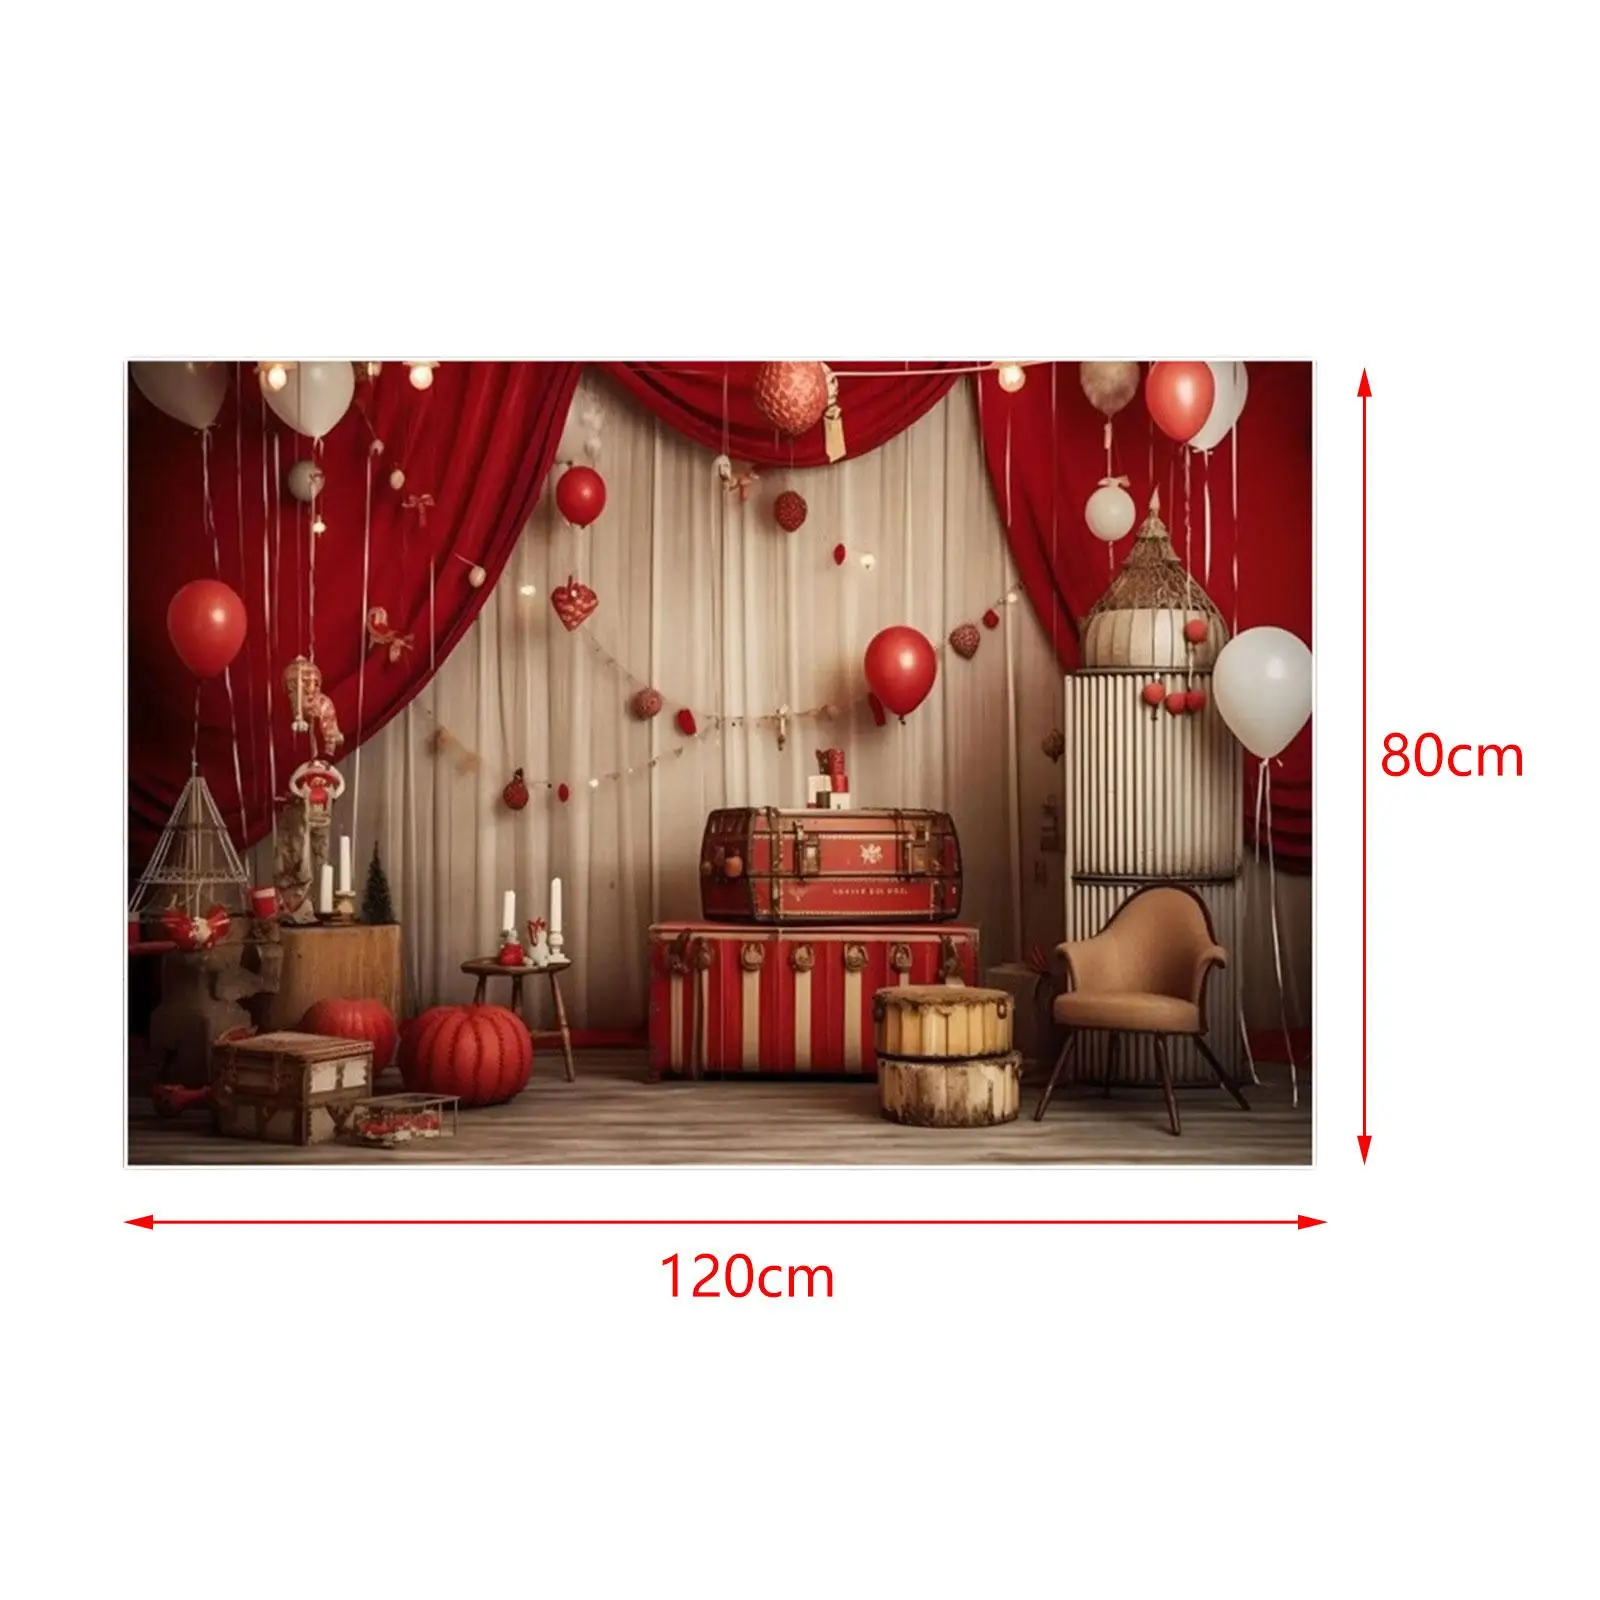 Photography Background Cloth Wall Hanging 3D Printing Photo Booth Props 120cmx80cm for Celebration Holiday Party Christmas Kids